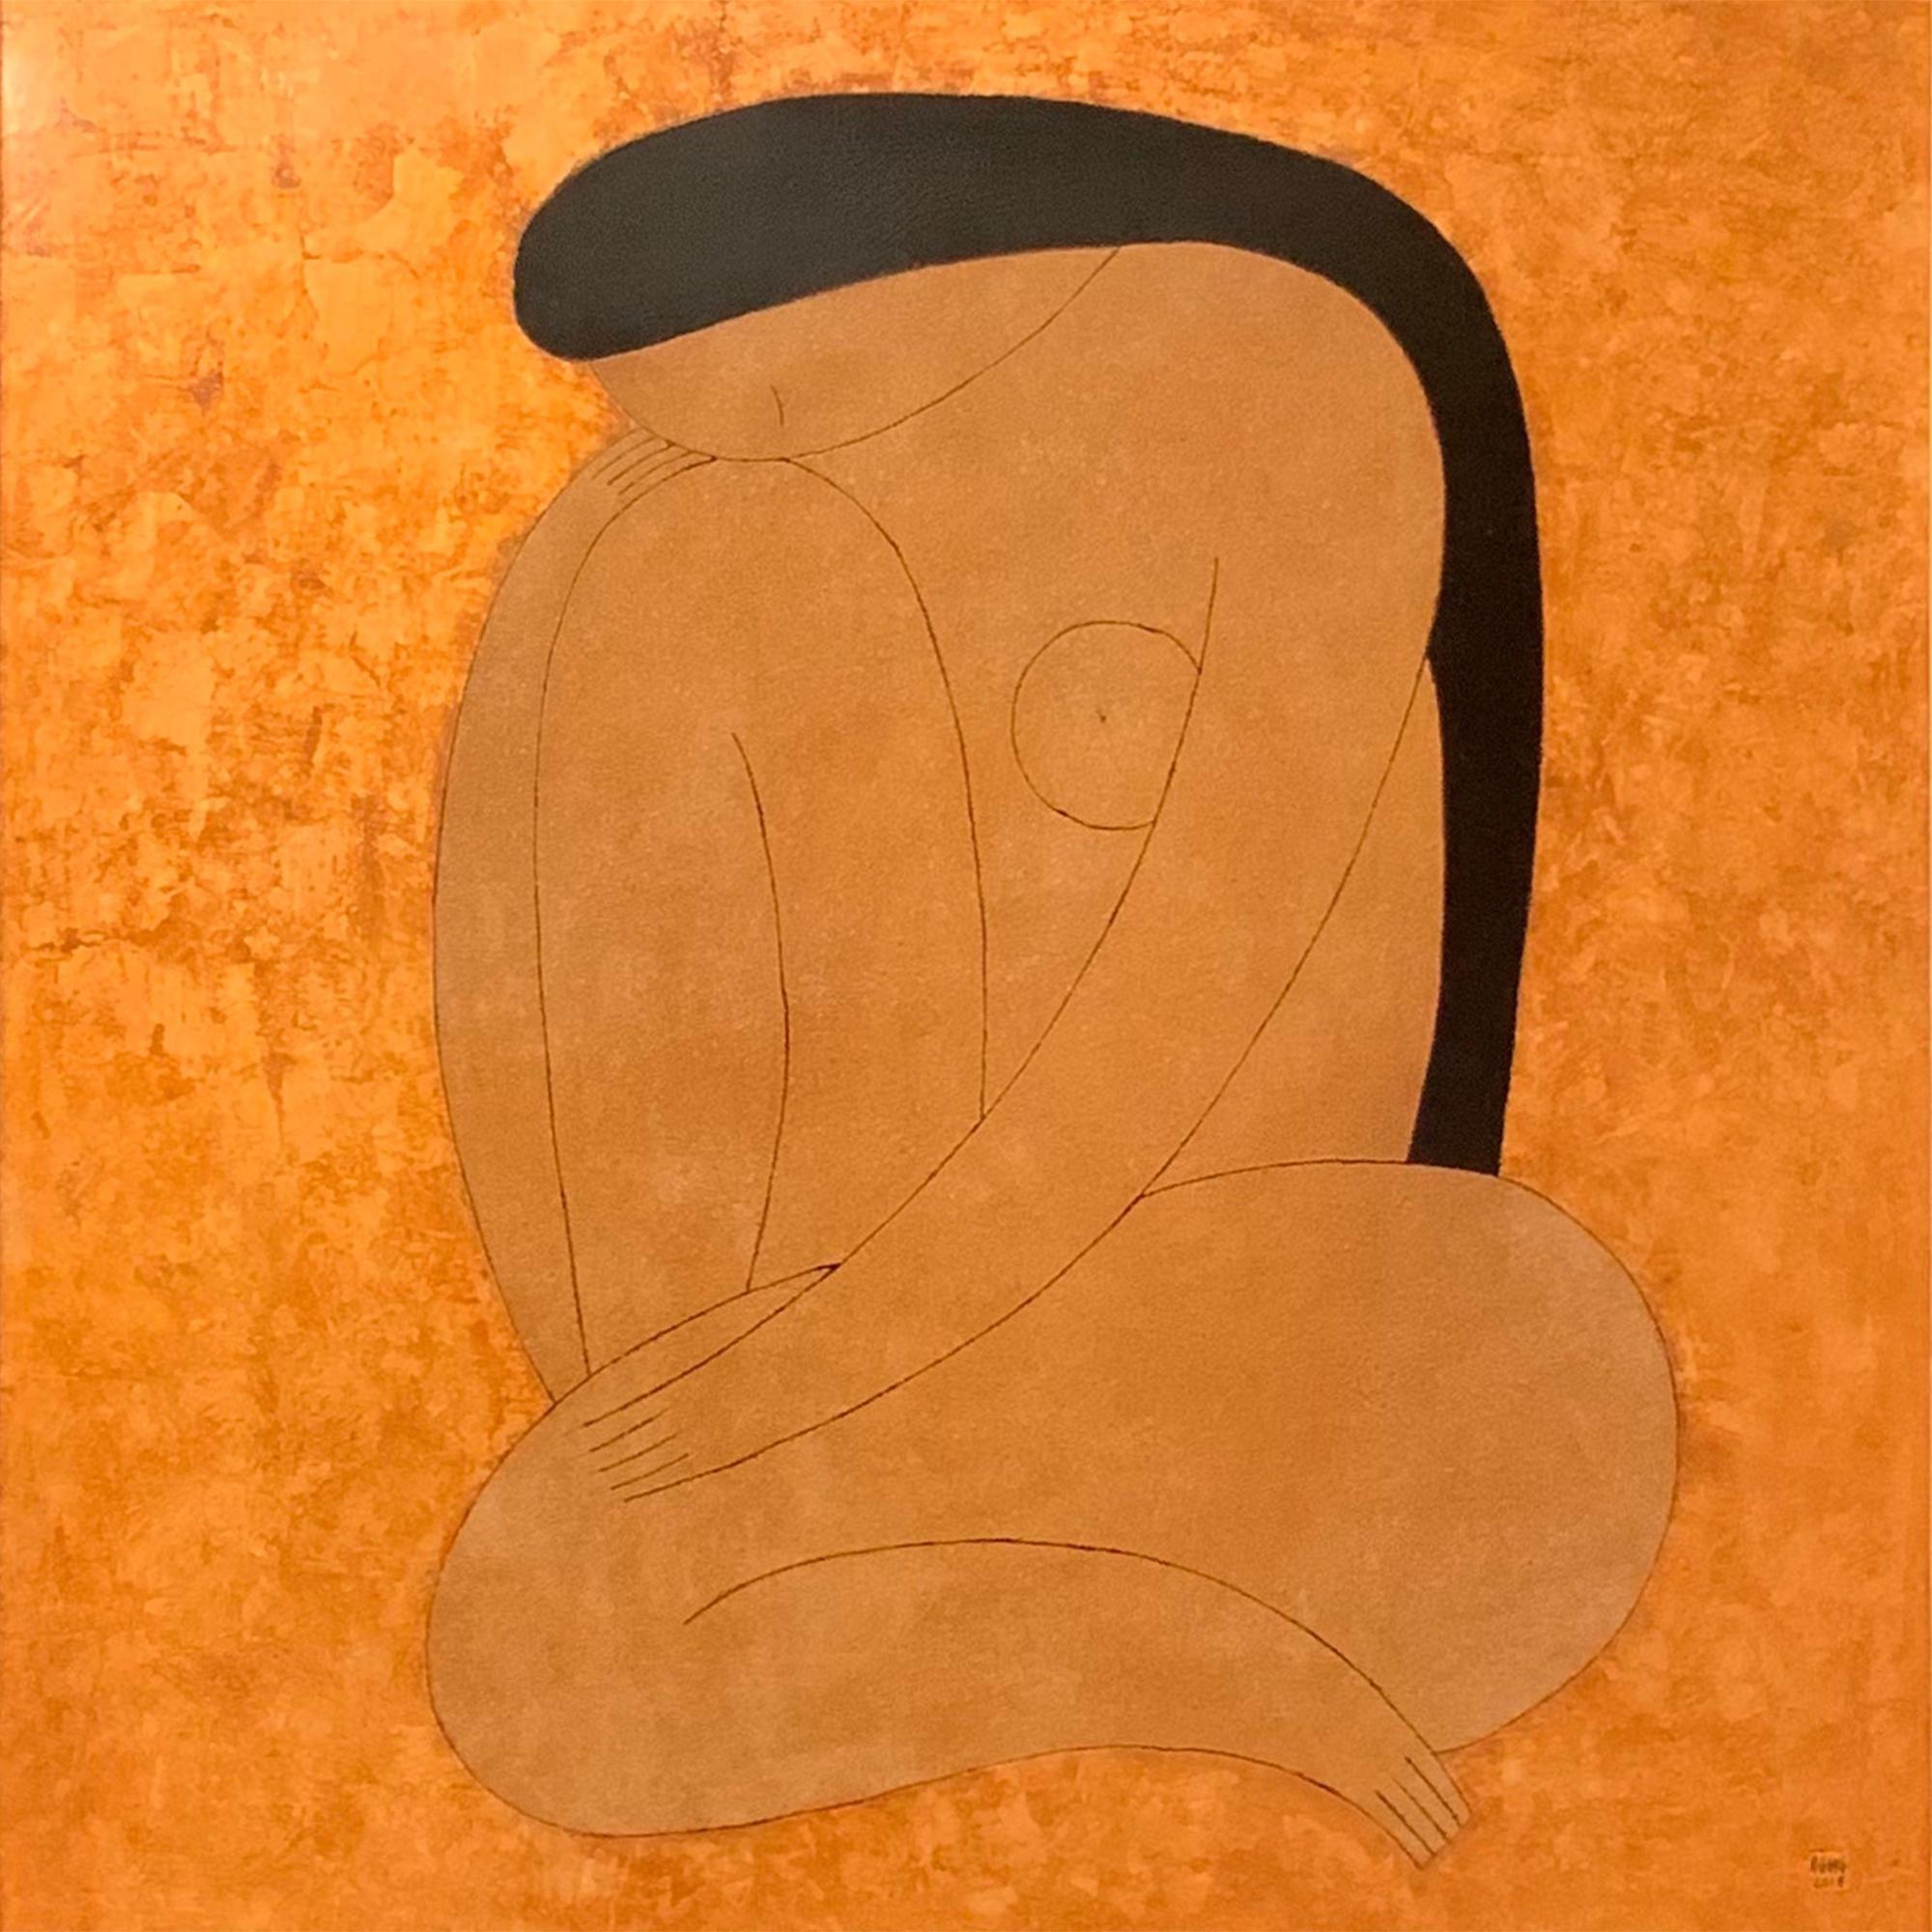 Dinh Hanh Nude Painting - 'Elusive Contemplation II' Contemporary Nude Portrait Featuring Gold & Black